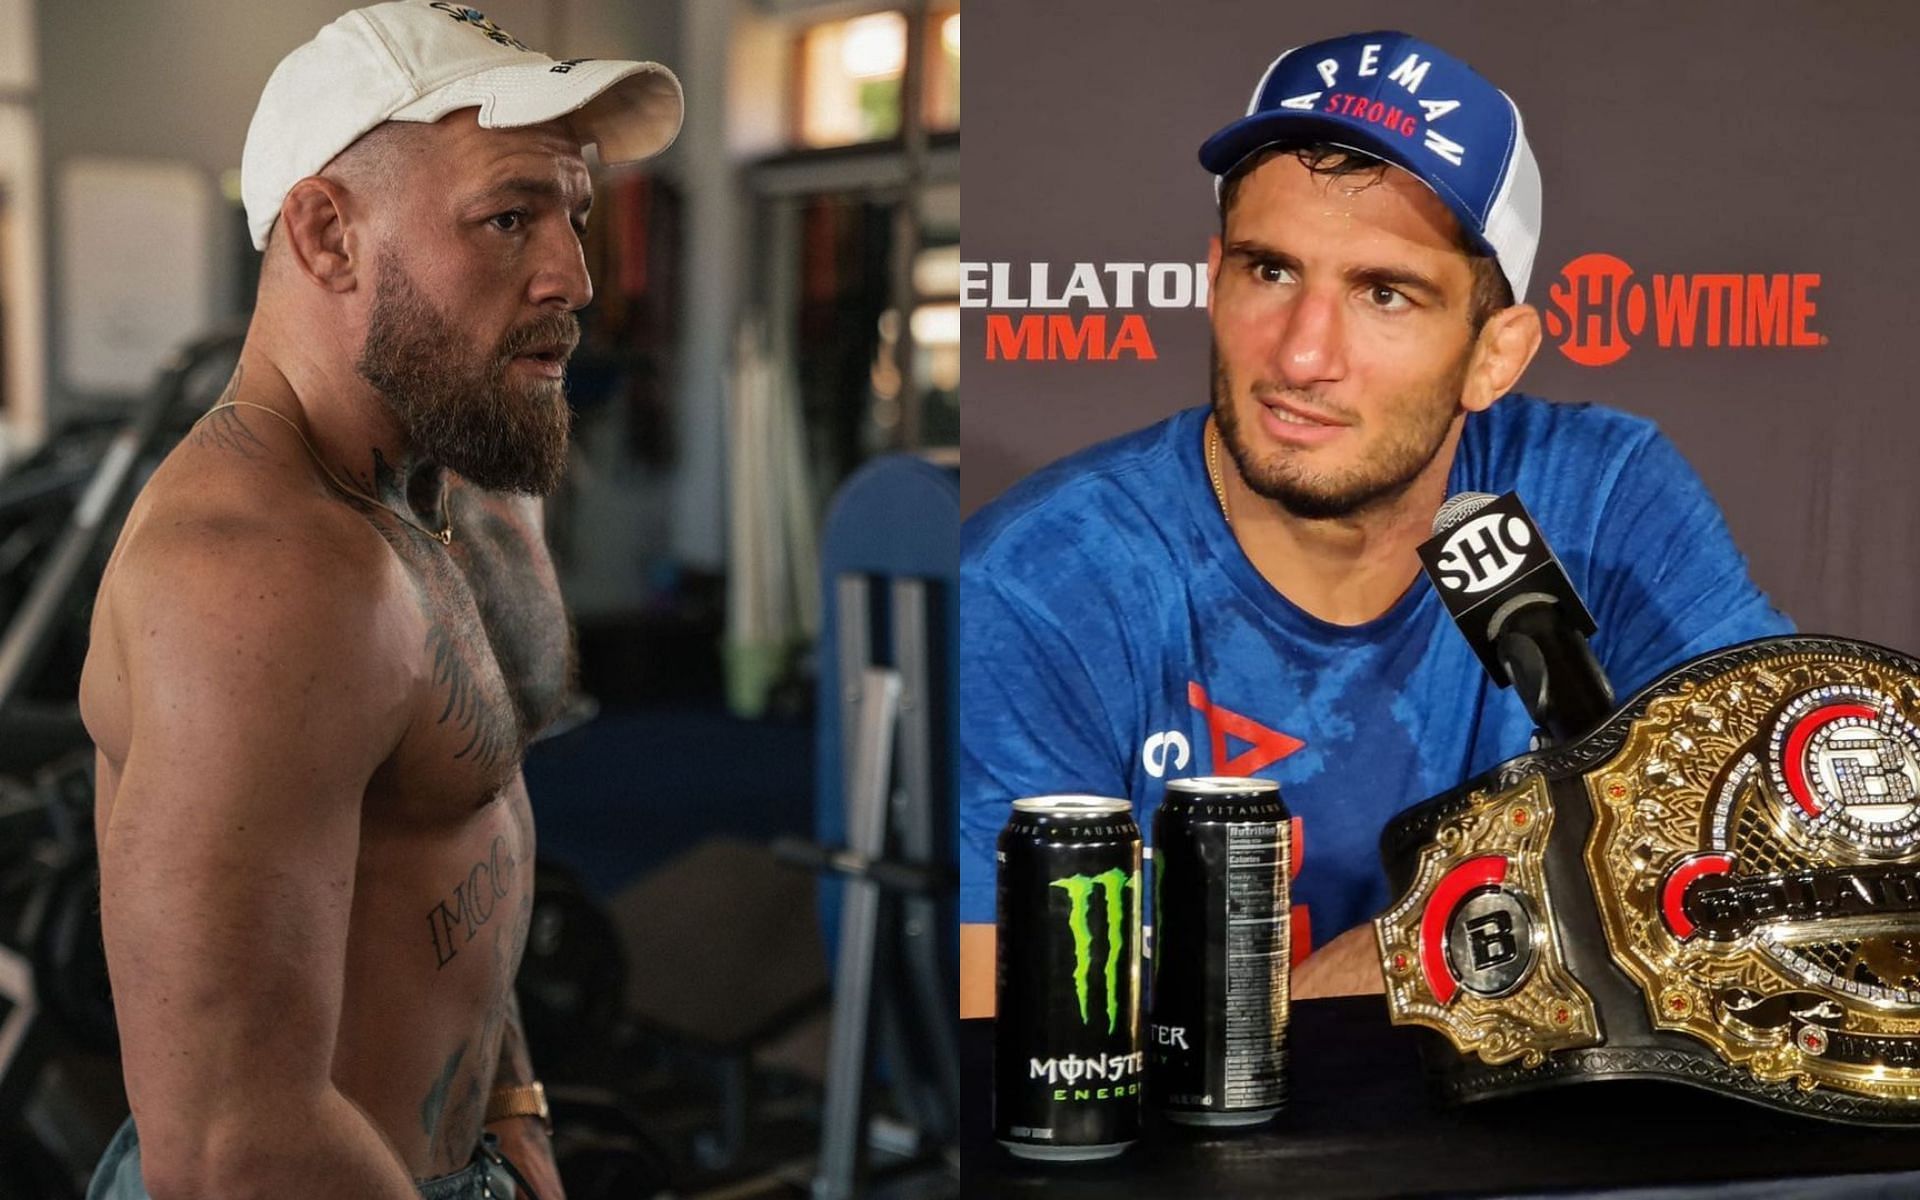 Gegard Mousasi's beef with Conor McGregor cost him a fan. What's going on between them?
